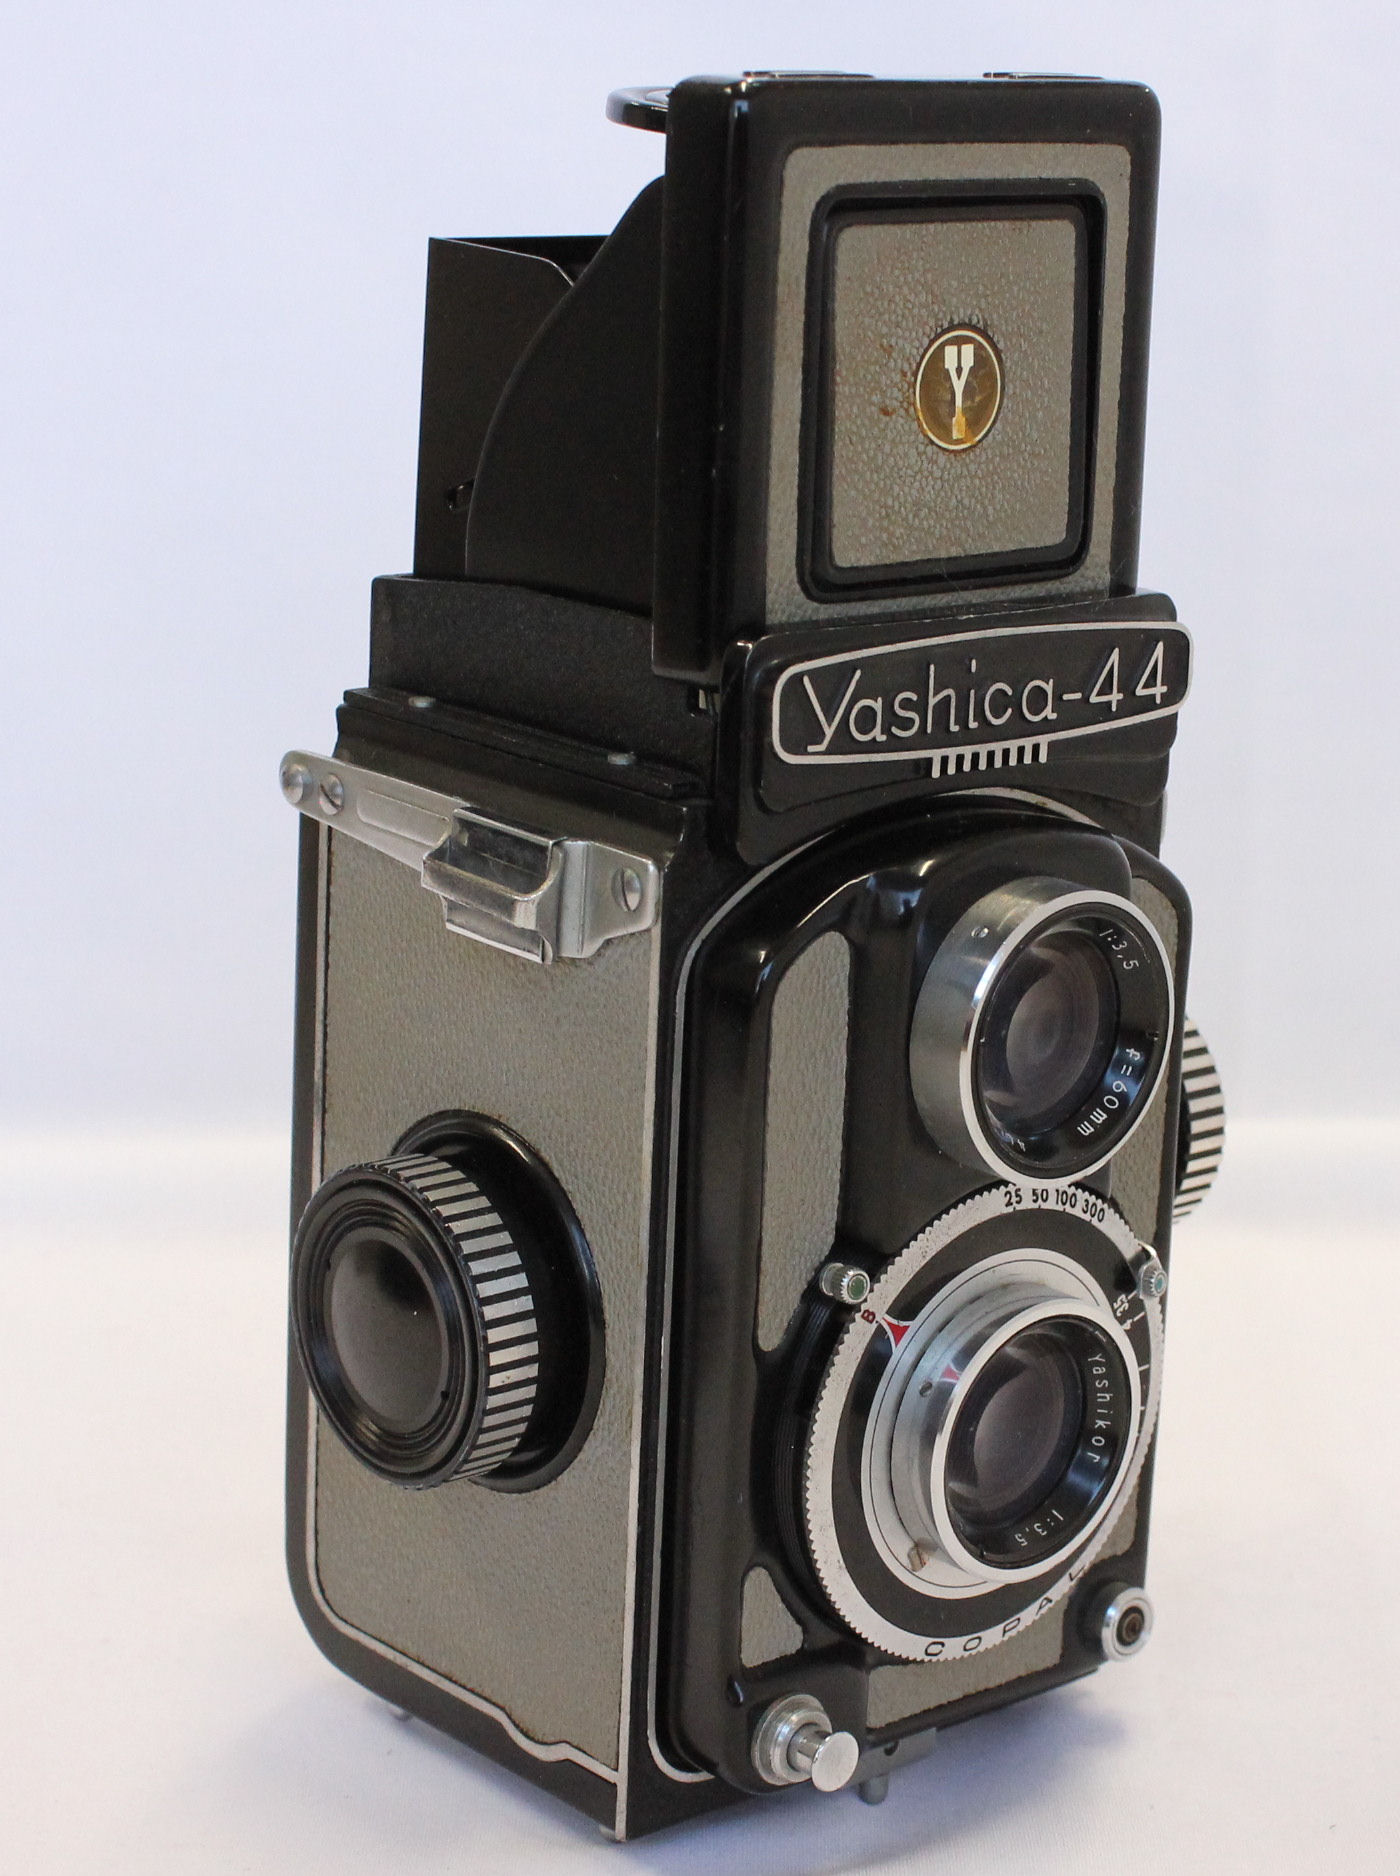   Yashica 44 A 127 4x4 TLR Camera w/ Yashikor 60mm F3.5 Lens from Japan Photo 2